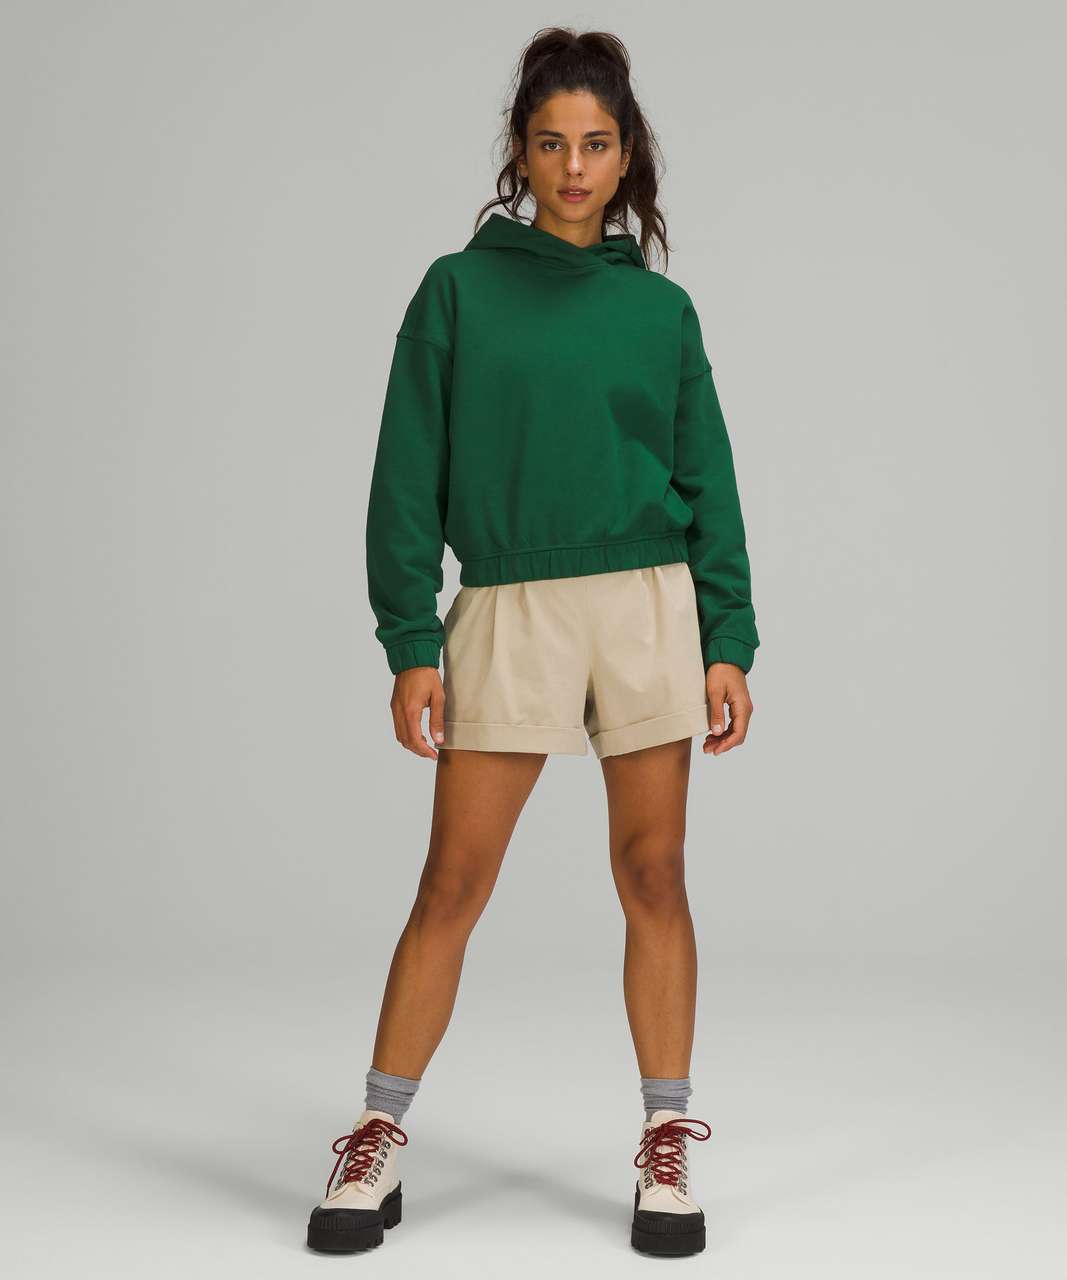 Lululemon Relaxed Cropped Hoodie - Everglade Green